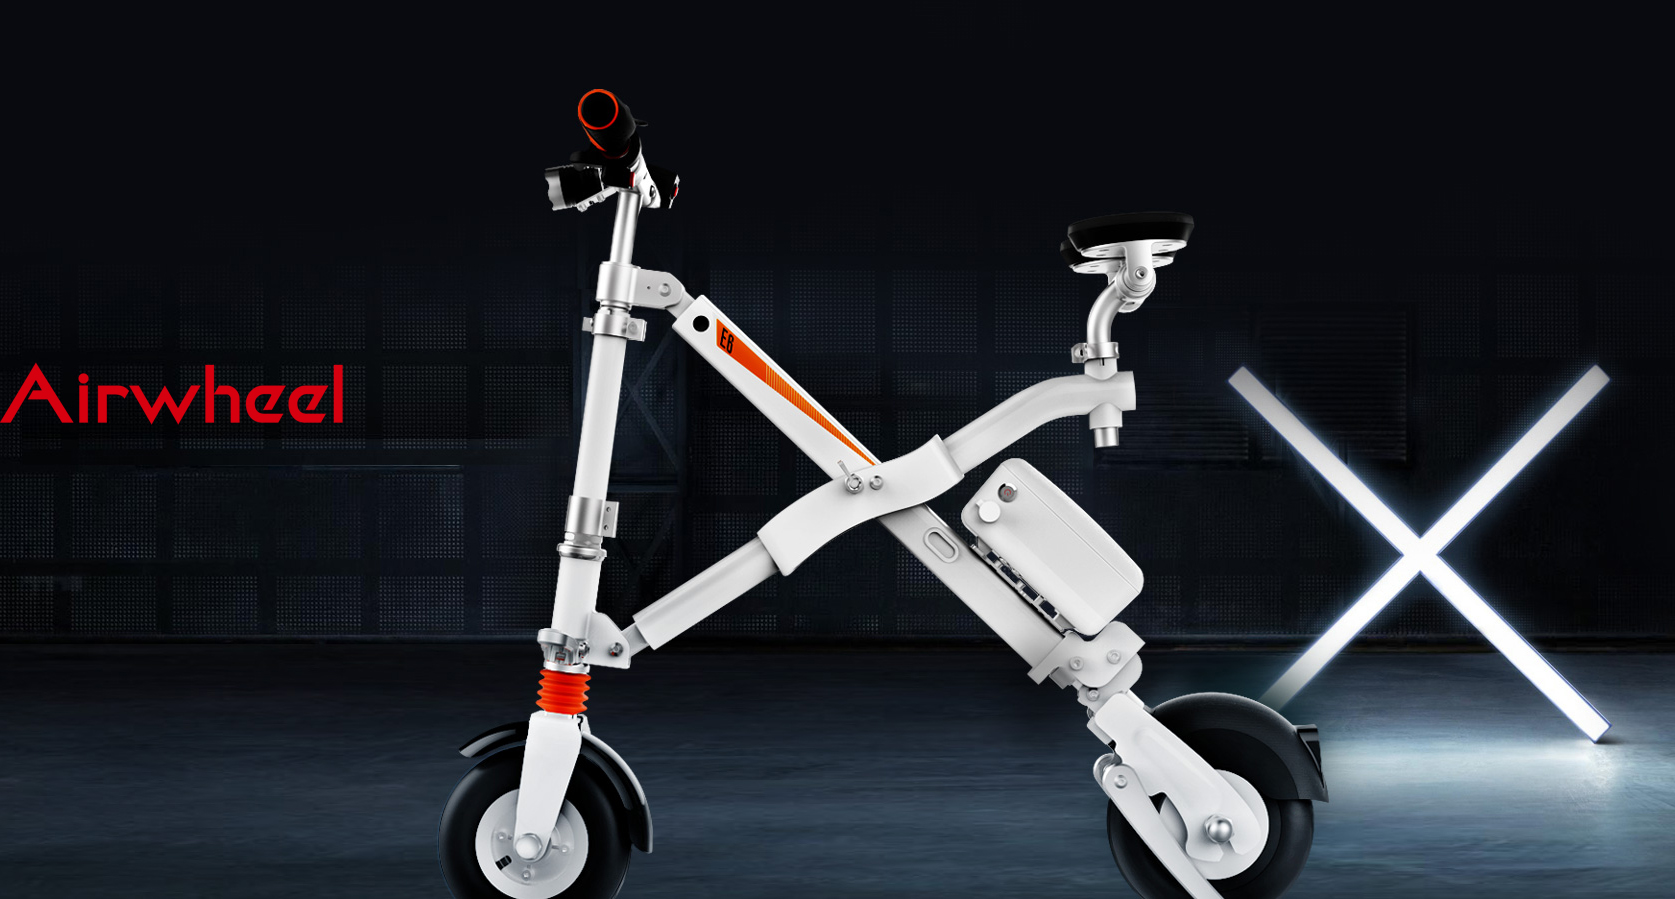 No matter where you intend to go, Airwheel electric mobility scooter will bring you there.